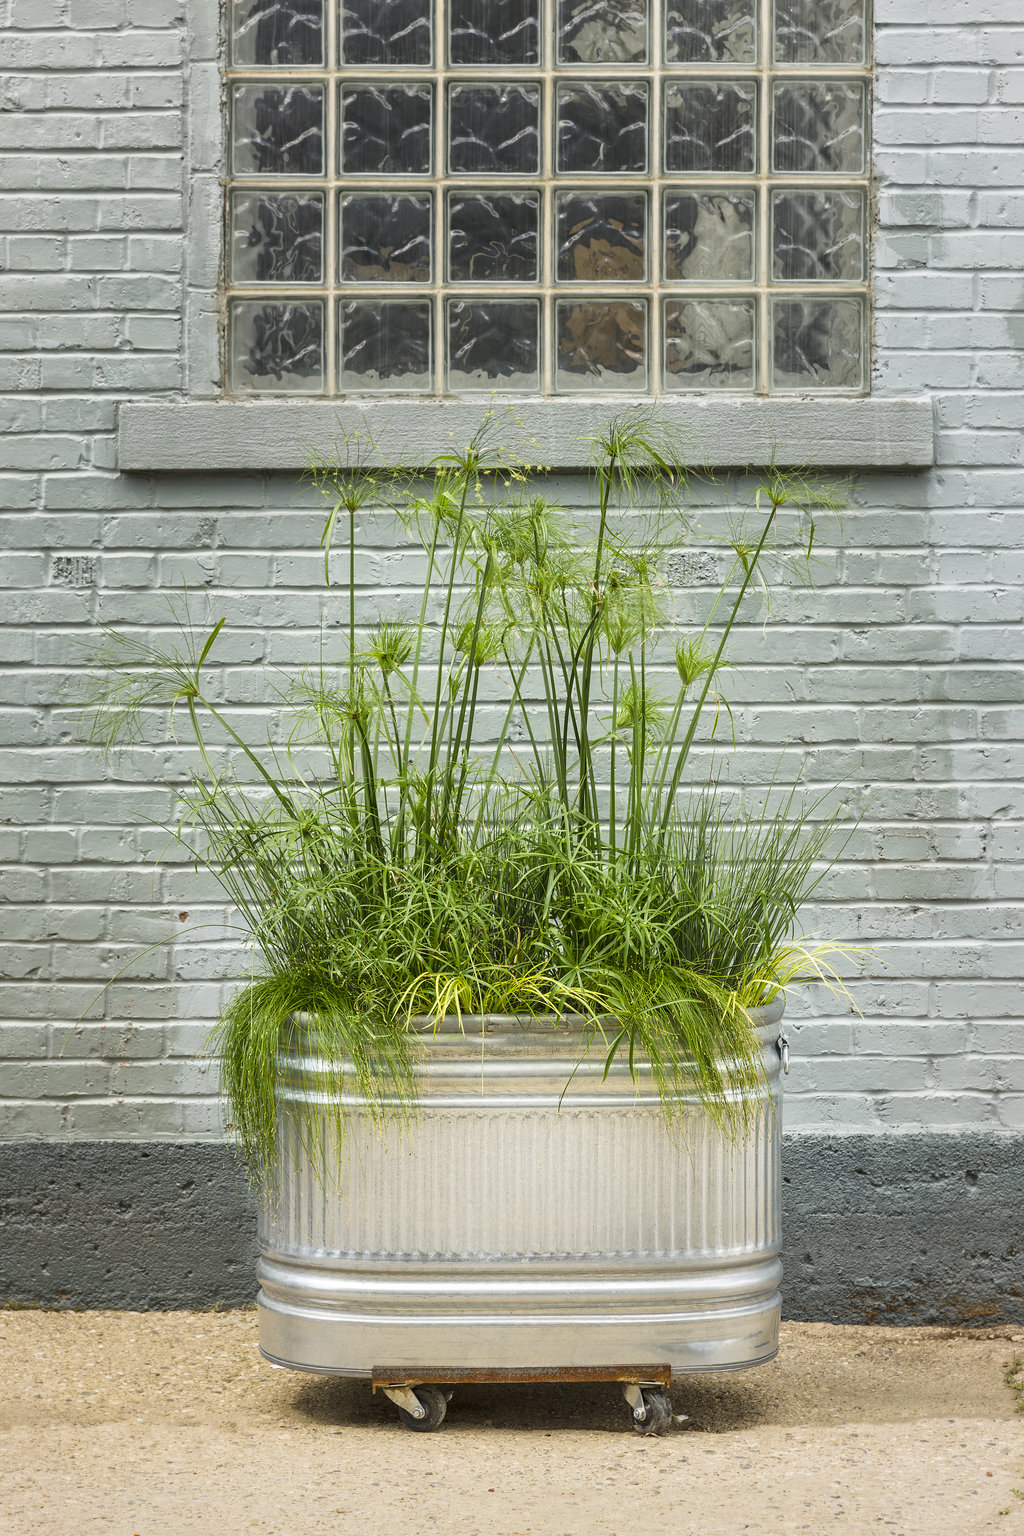 A fathers day plant gift - a planter with plants on wheels - placed in front of a brick building.